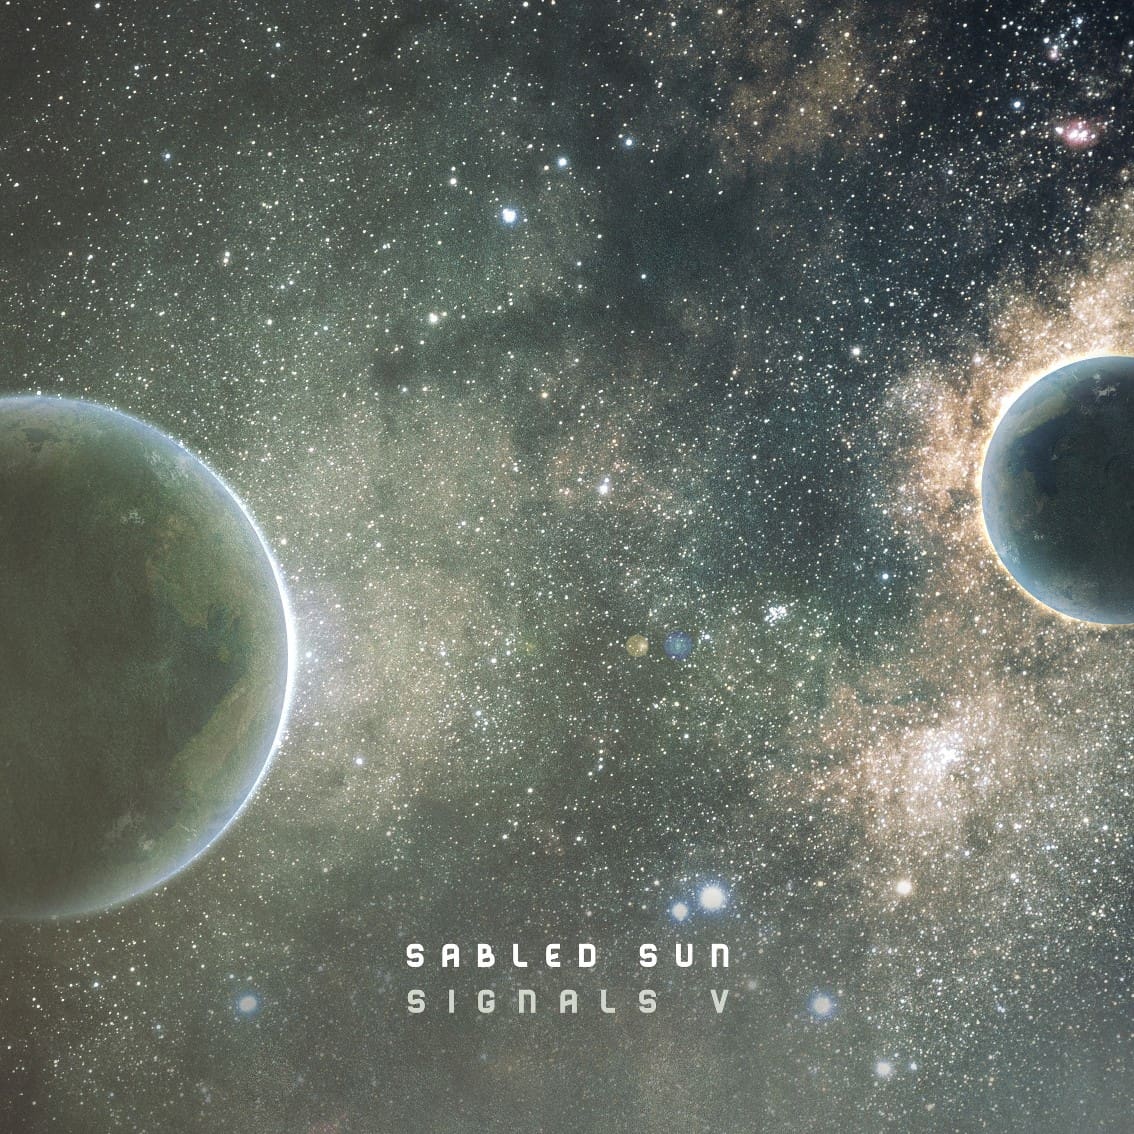 5th album in the 'Sabled Sun's Signals' series, 'Signals V', expected in early August on Cryo Chamber